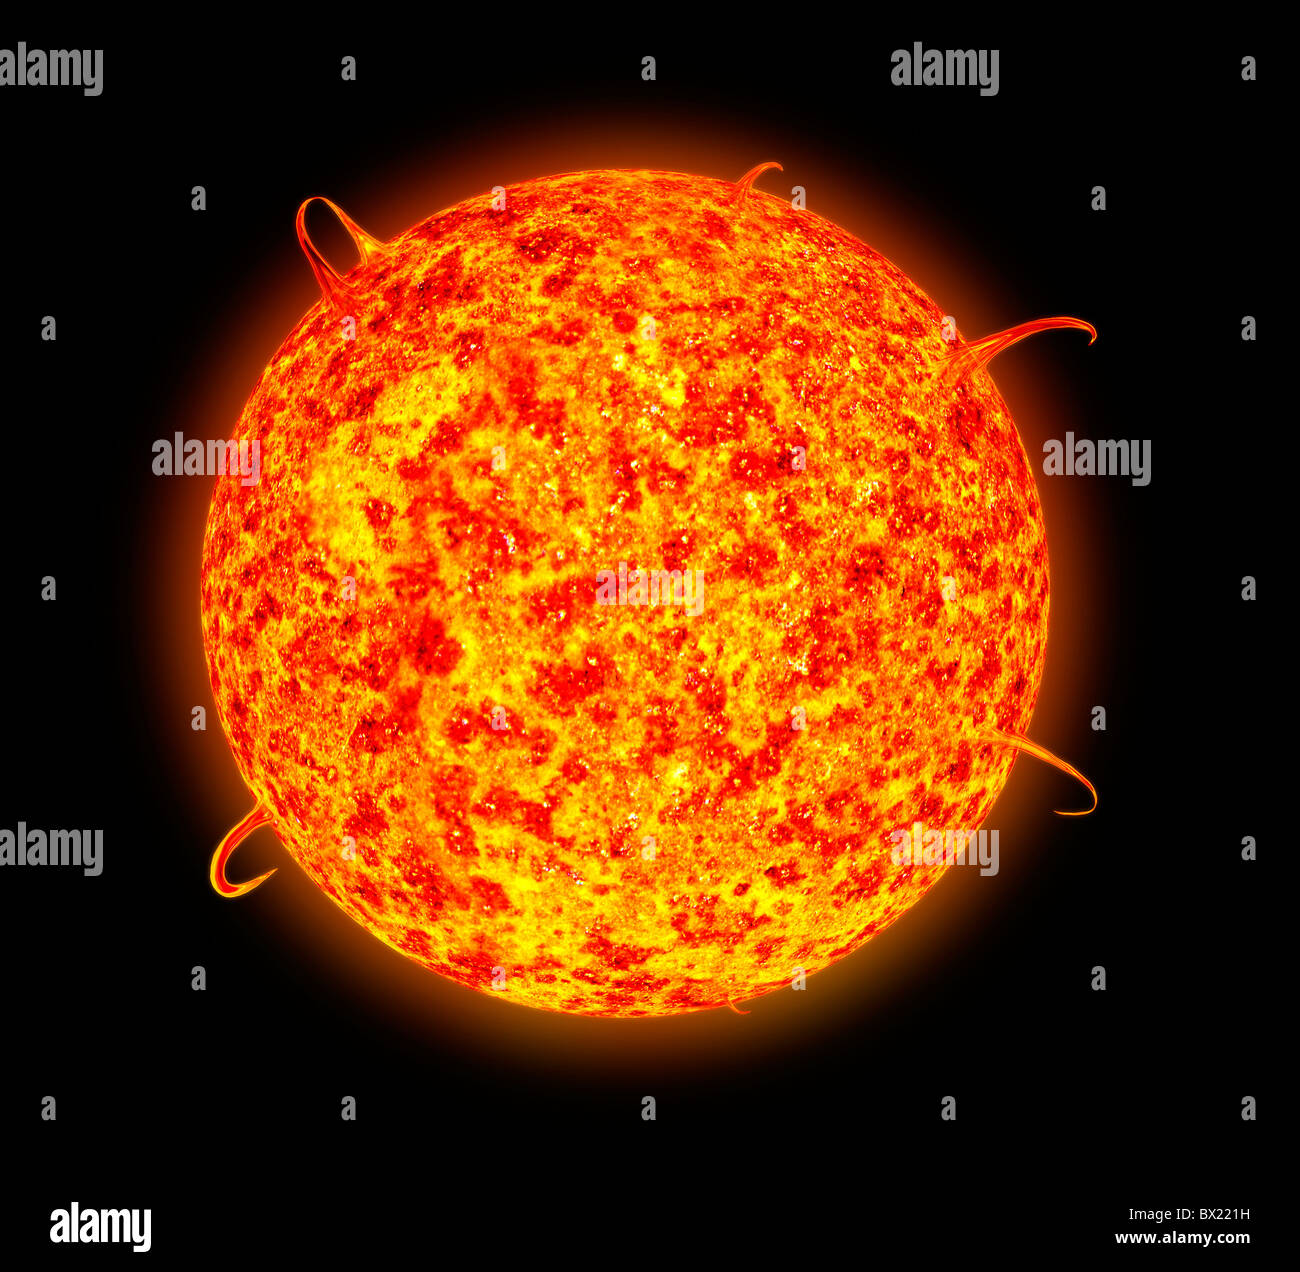 Illustration of sunspot and solar flare activity as one might see it through a spectroscope Stock Photo